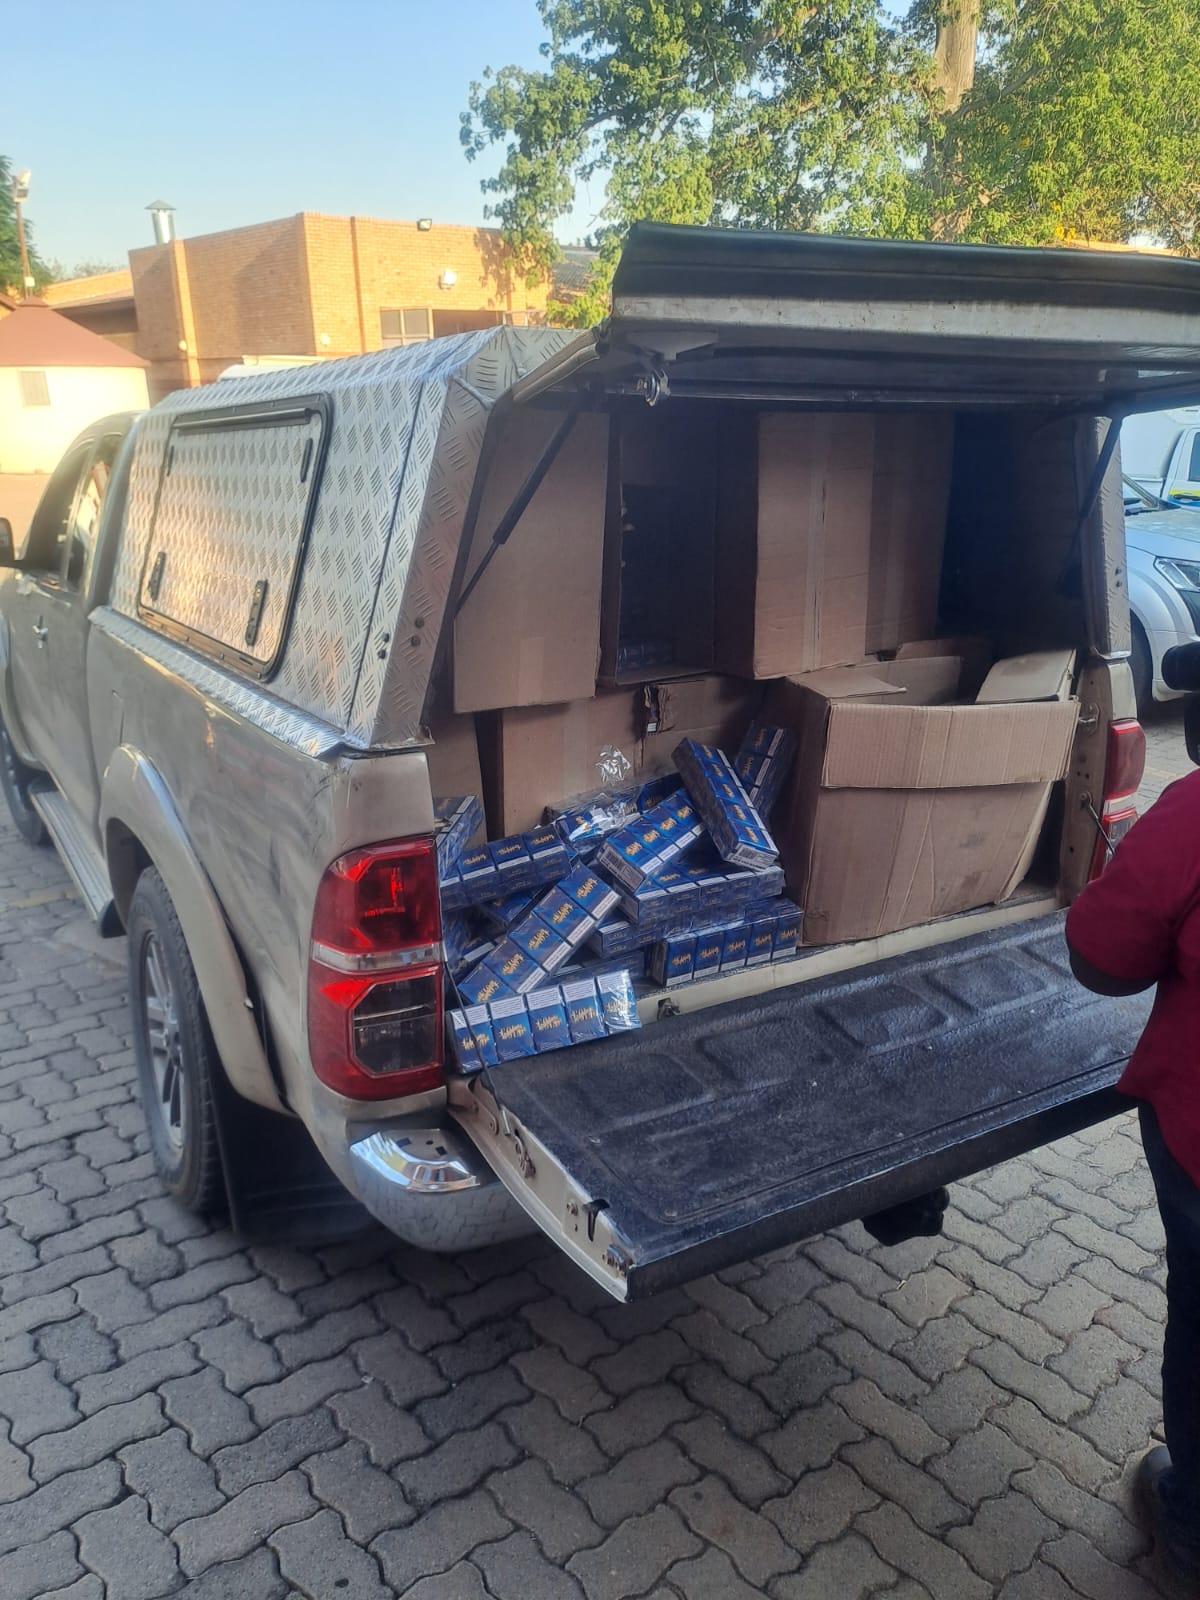 Musina Task Team Police confiscate a Toyota Bakkie and illicit cigarettes with a combined value of more than R350 000